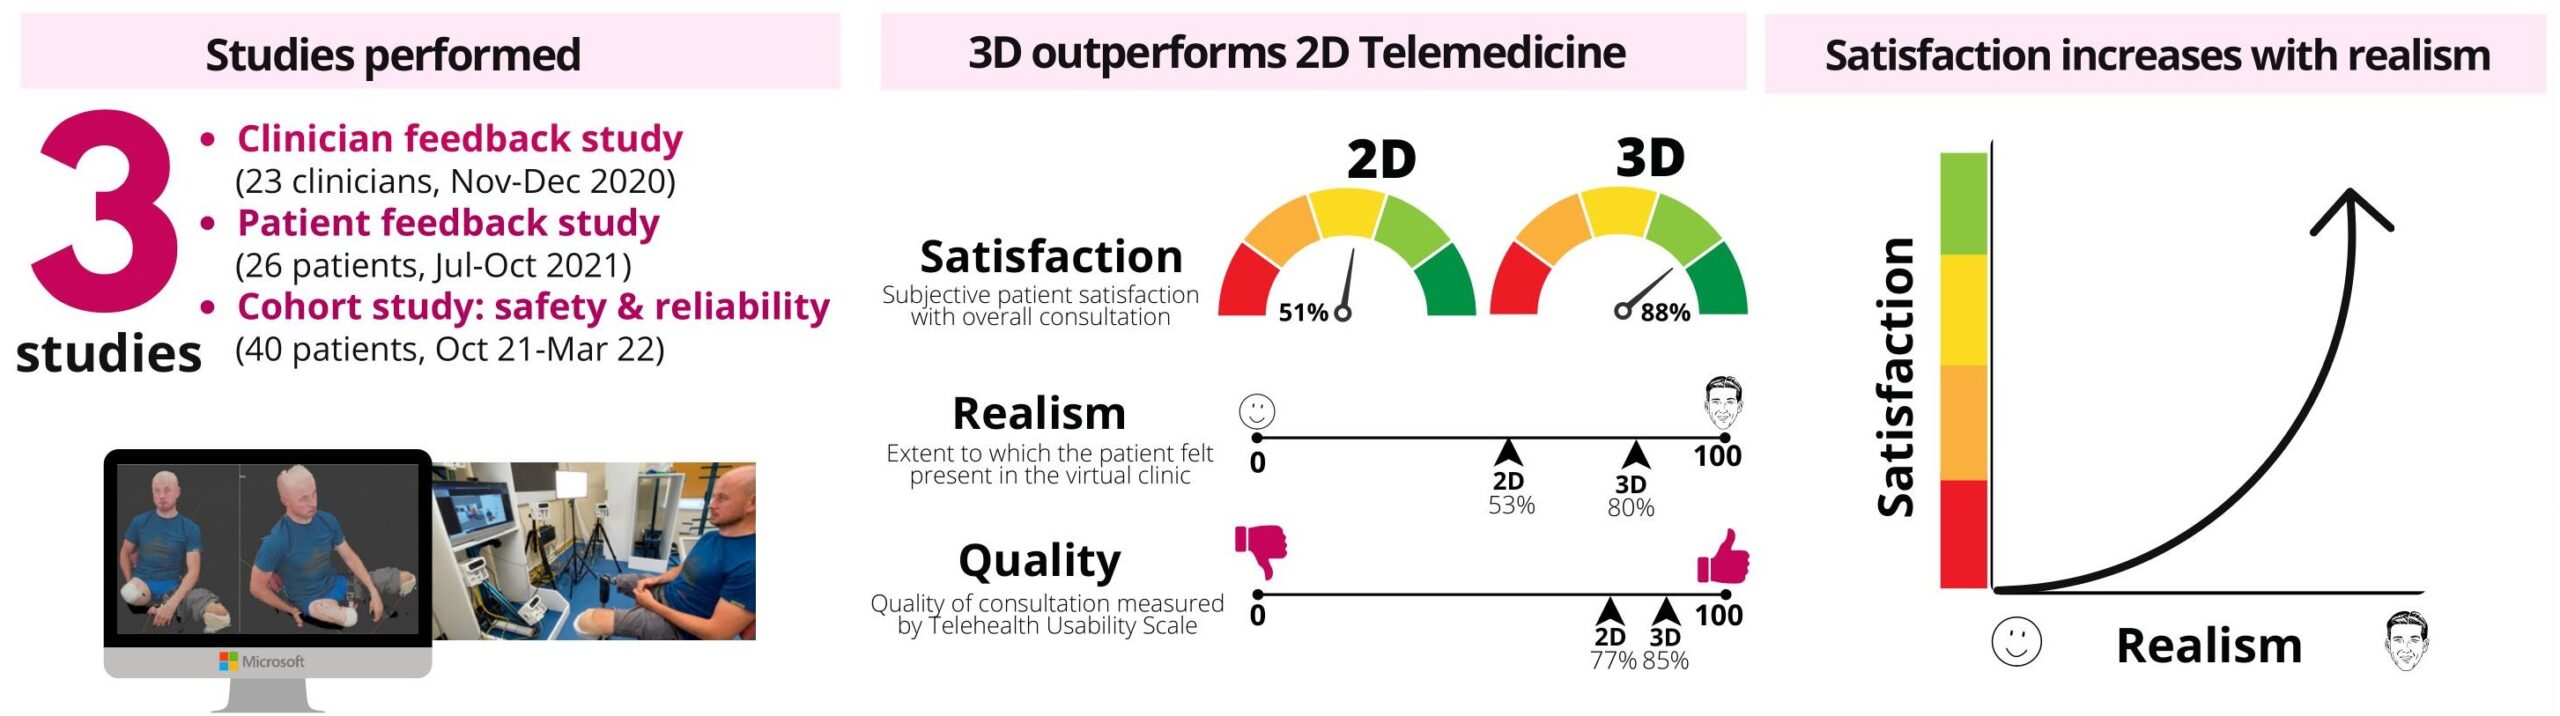 3D Telemedicine - Three graphics displayed side-by-side. The first one describes the three studies performed: Clinician feedback study (23 clinicians, Nov-Dec 2020), Patient feedback study (26 patients, Jul-Oct 2021) and Cohort study: safety & reliability (40 patients, Oct 21-Mar 22). It also has a picture of a monitor displaying a 3D model of a patient and the corresponding photo of the individual using the system. The second graphic is titled 